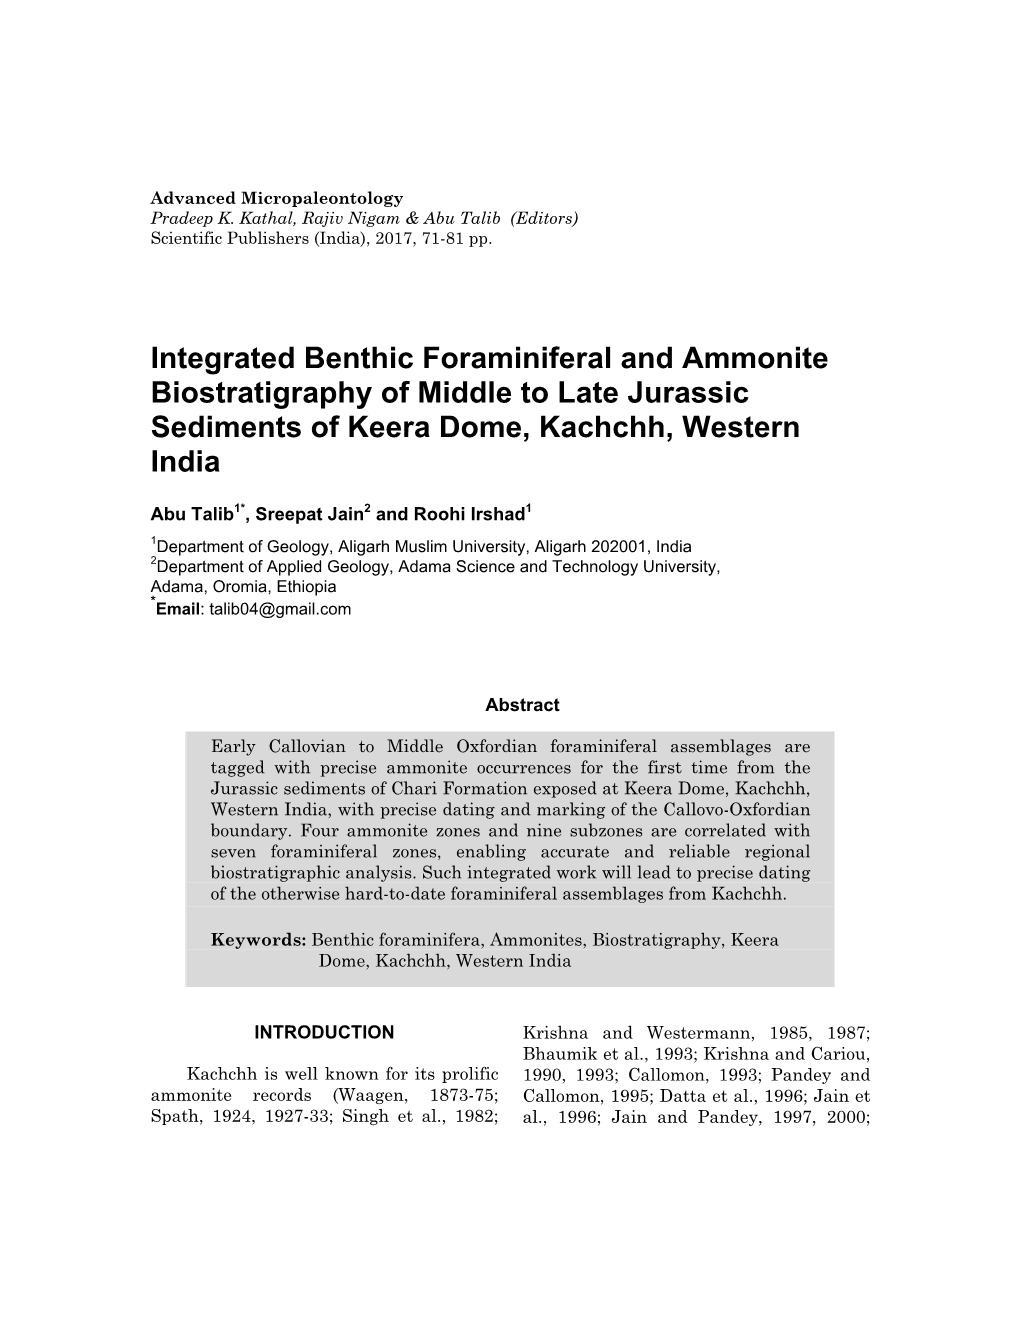 Integrated Benthic Foraminiferal and Ammonite Biostratigraphy of Middle to Late Jurassic Sediments of Keera Dome, Kachchh, Western India